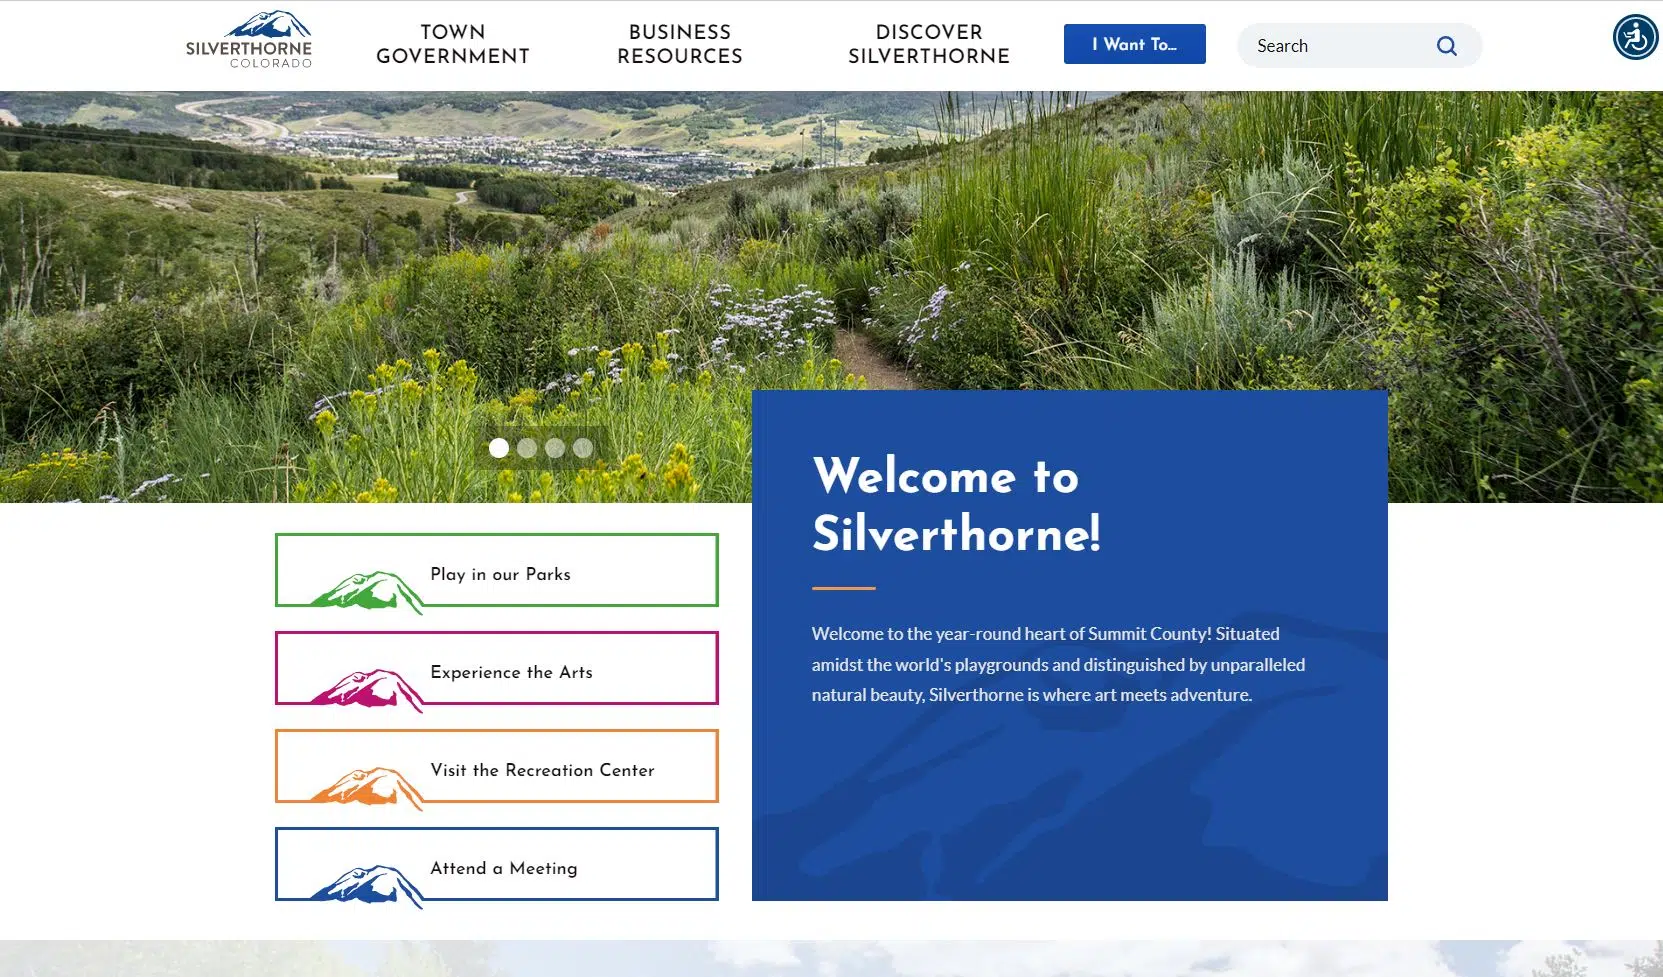 Cultural Engagement: The Silverthorne Colorado Government Website